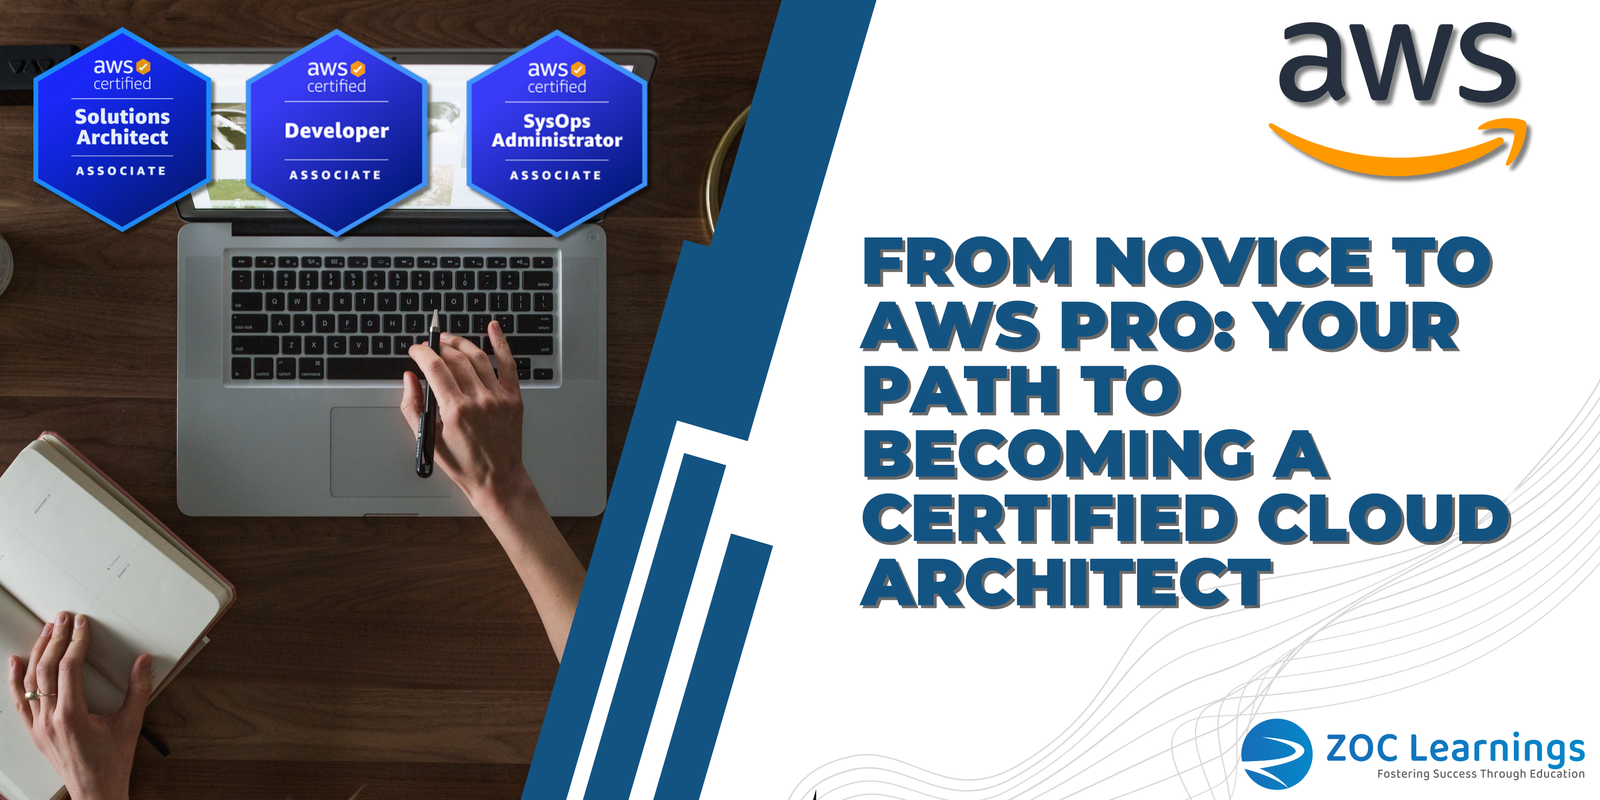 From Novice to AWS Pro: Your Path to Becoming a Certified Cloud Architect